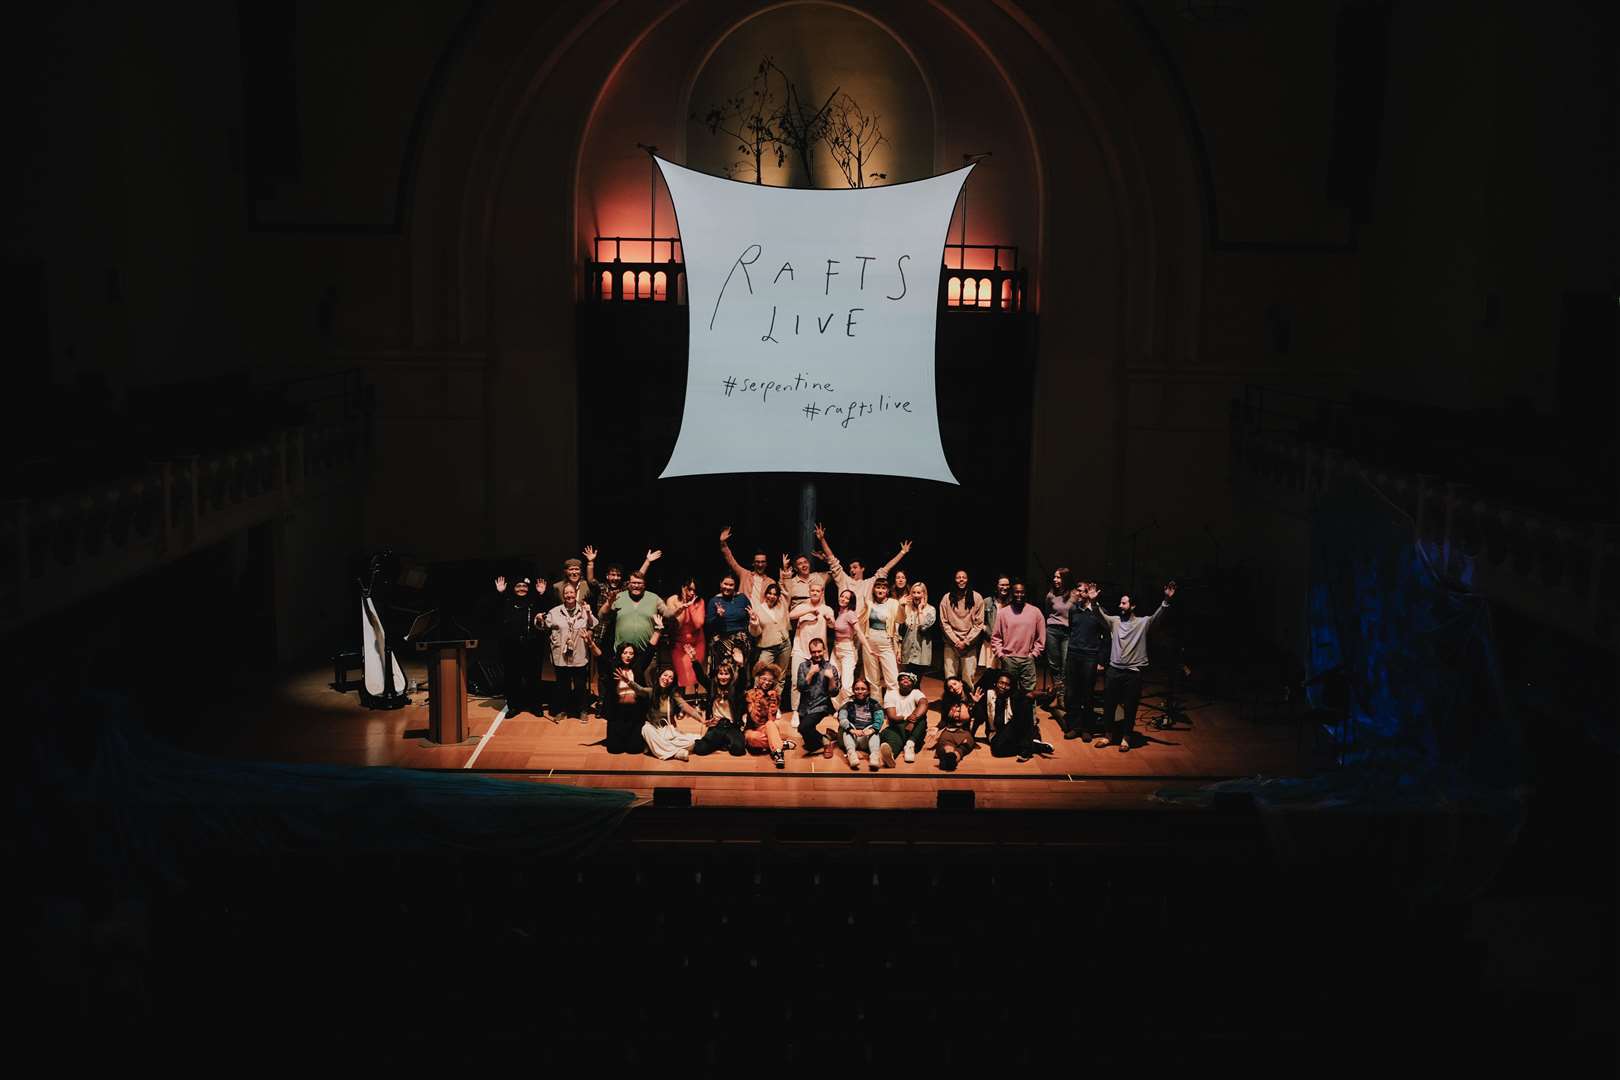 The live performance of RAFTS at Cadogan Hall in London (Matthew Ritson/PA)